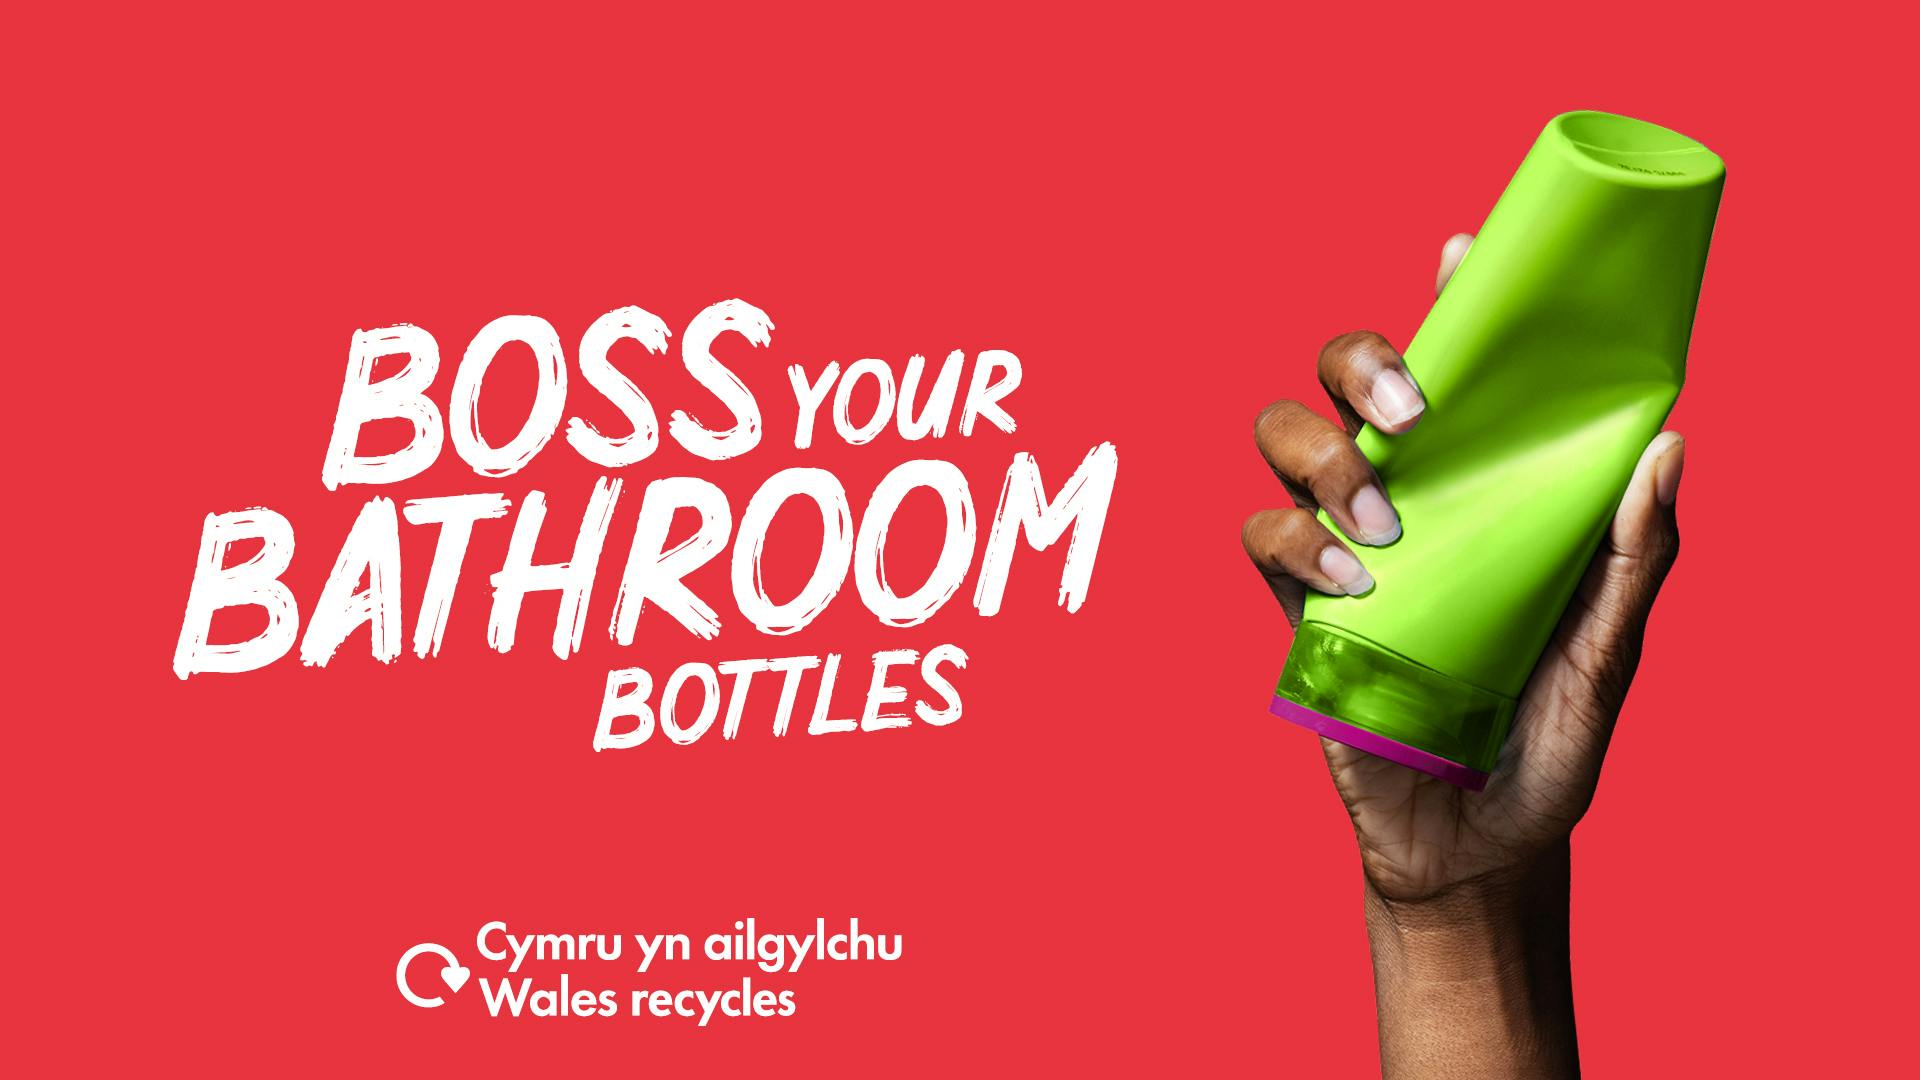 Woman's hand holding a green plastic shampoo bottle with the slogan "Boss your bathroom bottles"